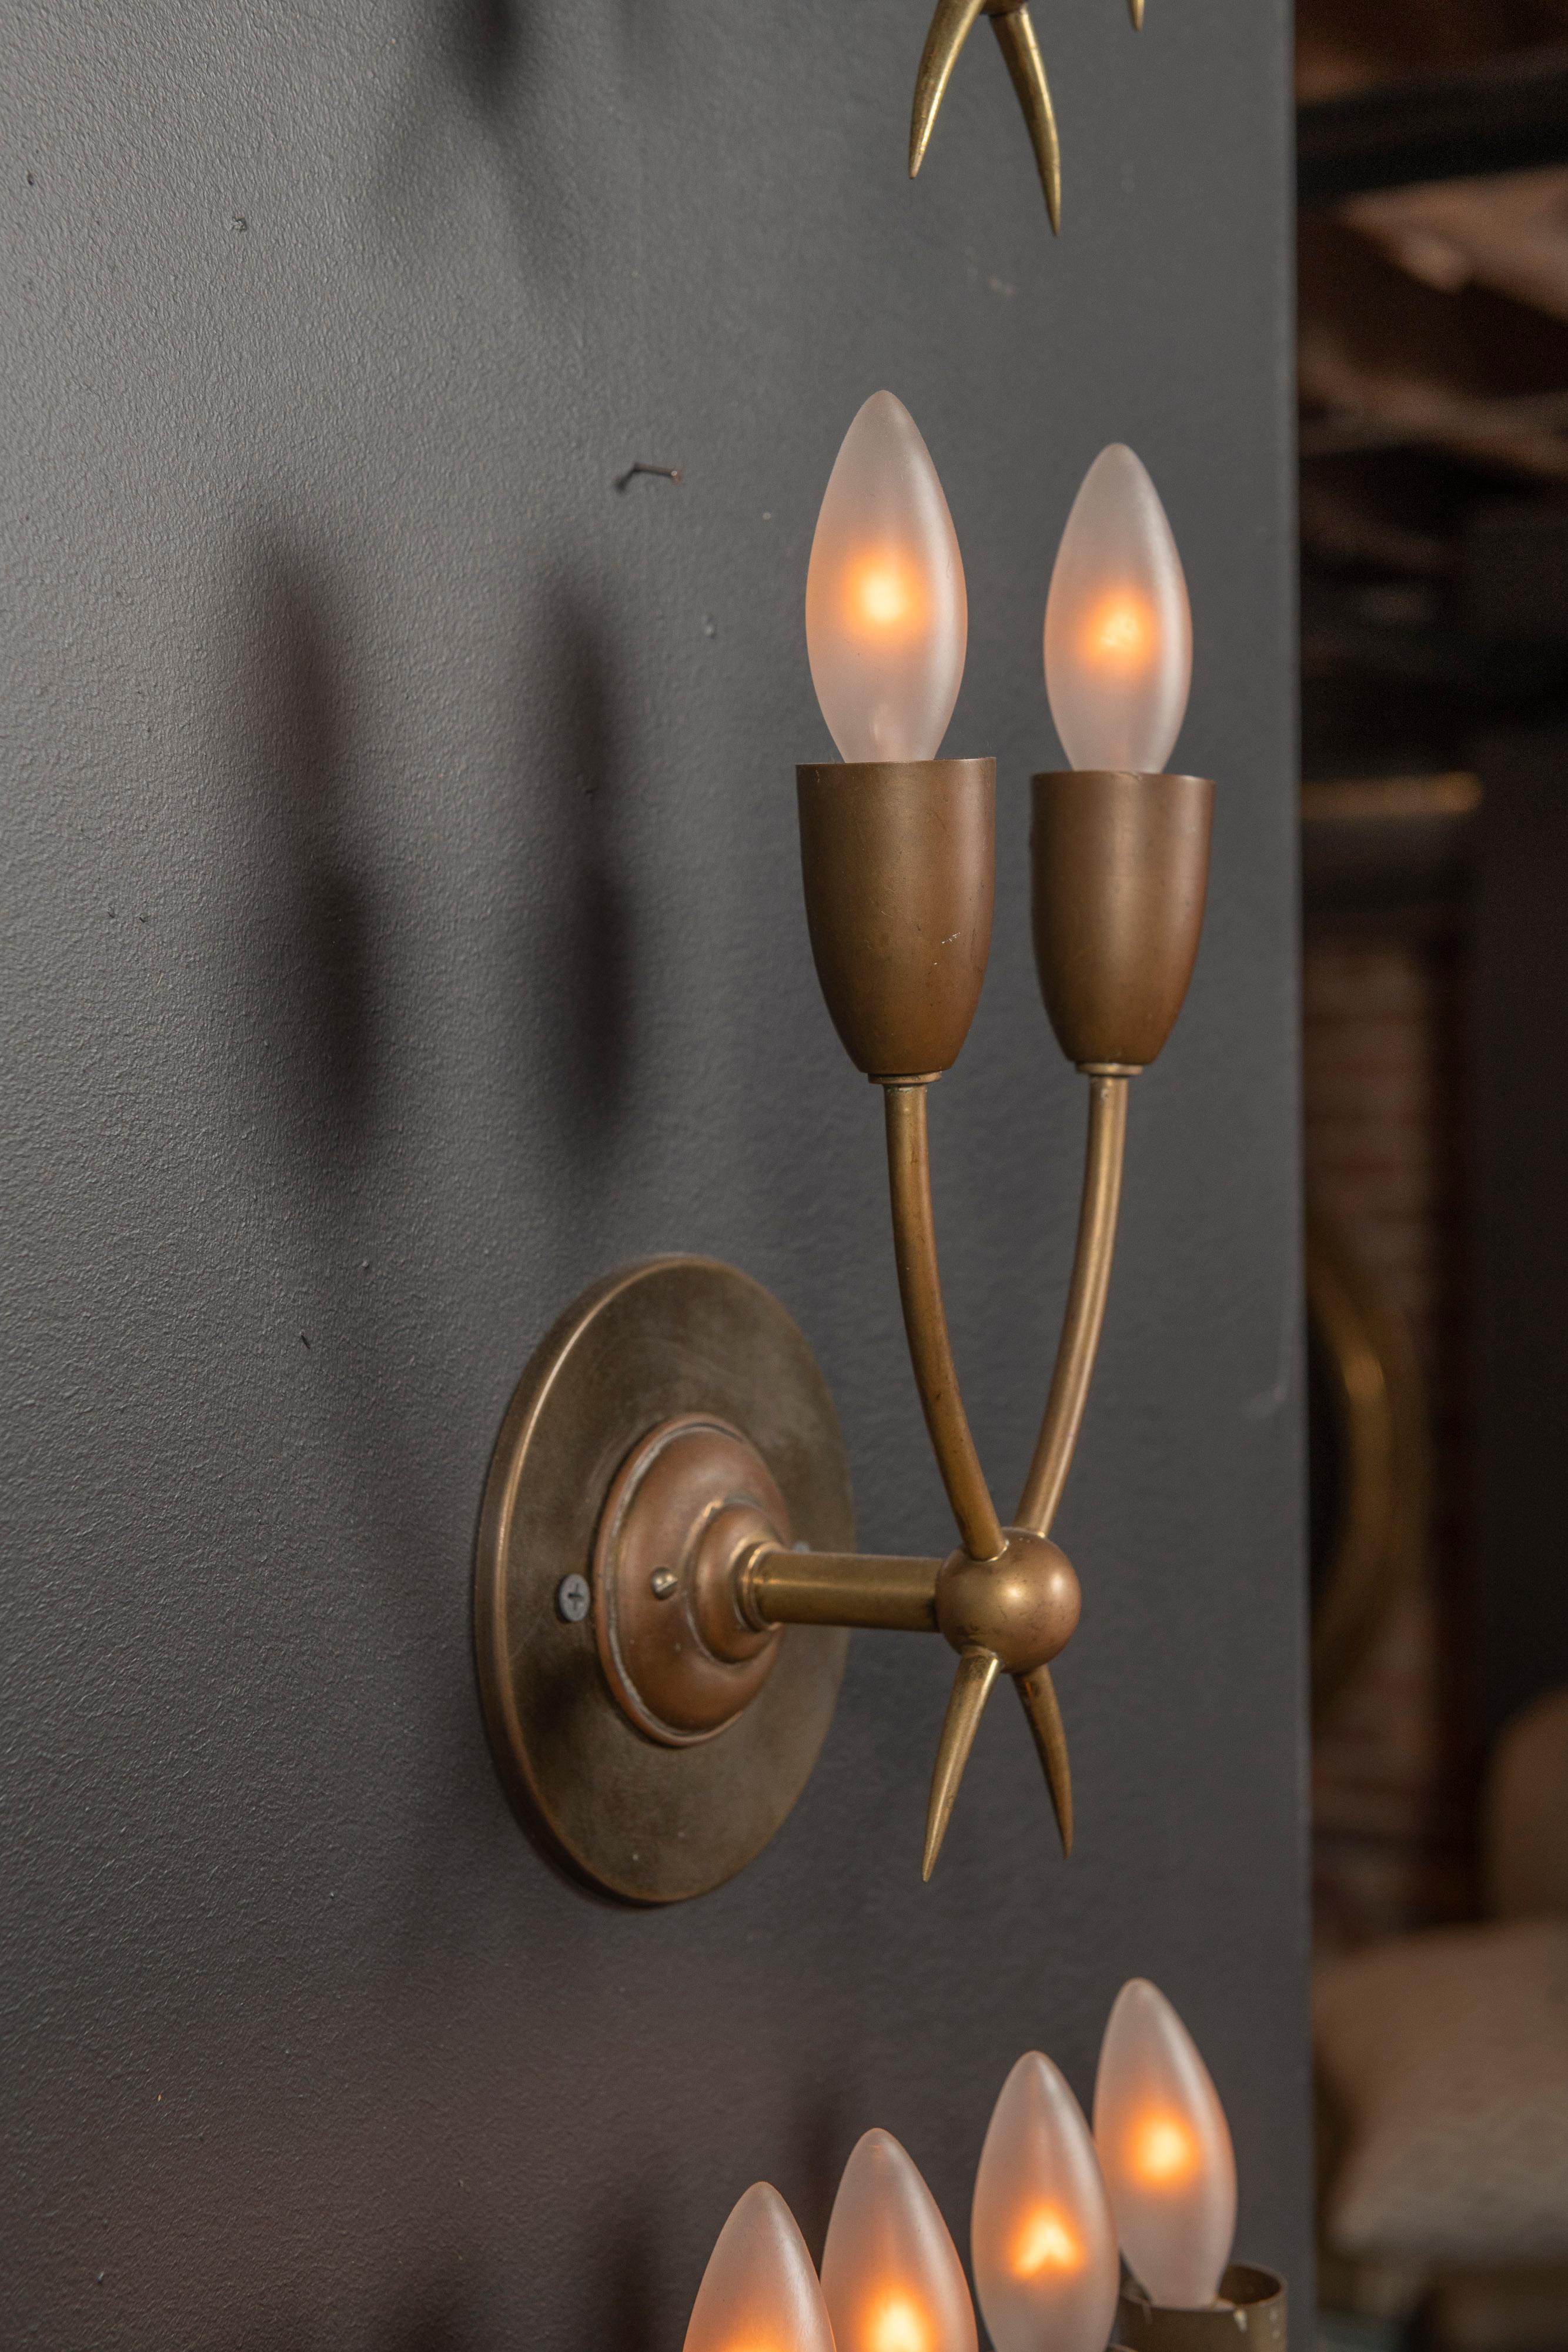 Pair of brass sconces manufactured by Guglielmo Ulrich in Italy circa late 1930s - early 1940s. Wired for US junction boxes. Each sconce takes two E14 European candelabra bulbs. 


 